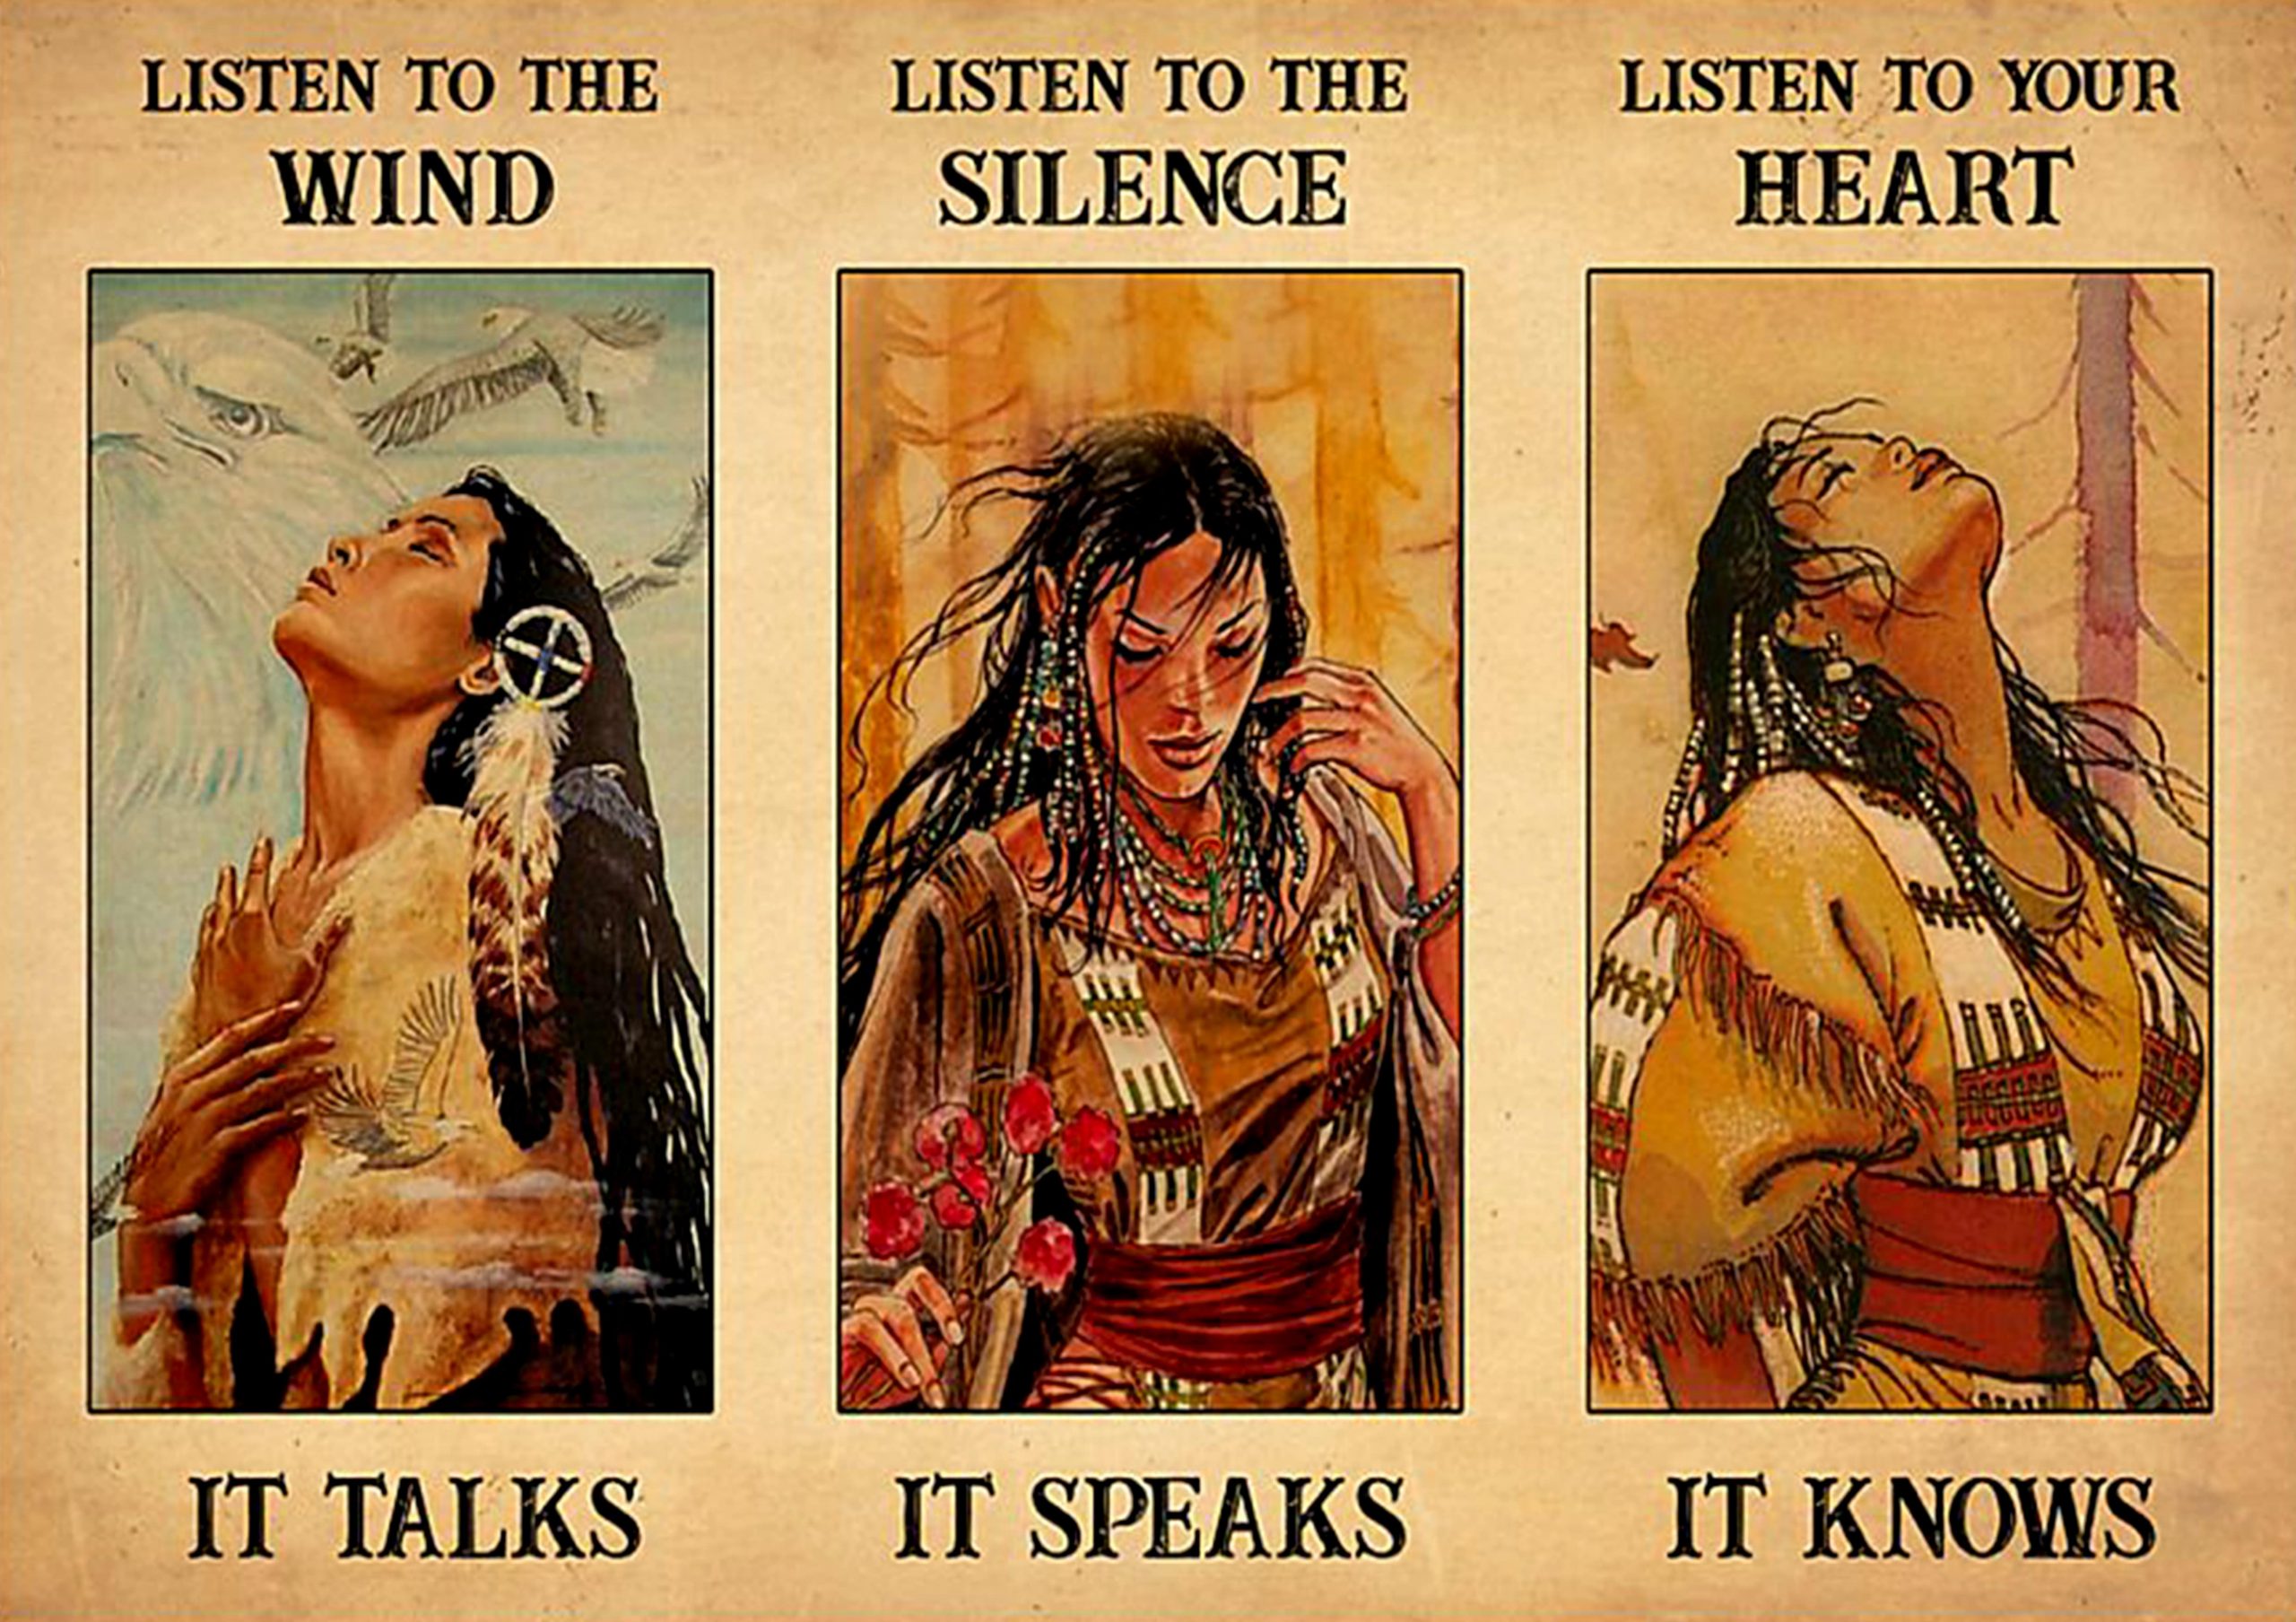 vintage native american girls listen to the wind it talks listen to the silence it speaks poster 1 - Copy (2)